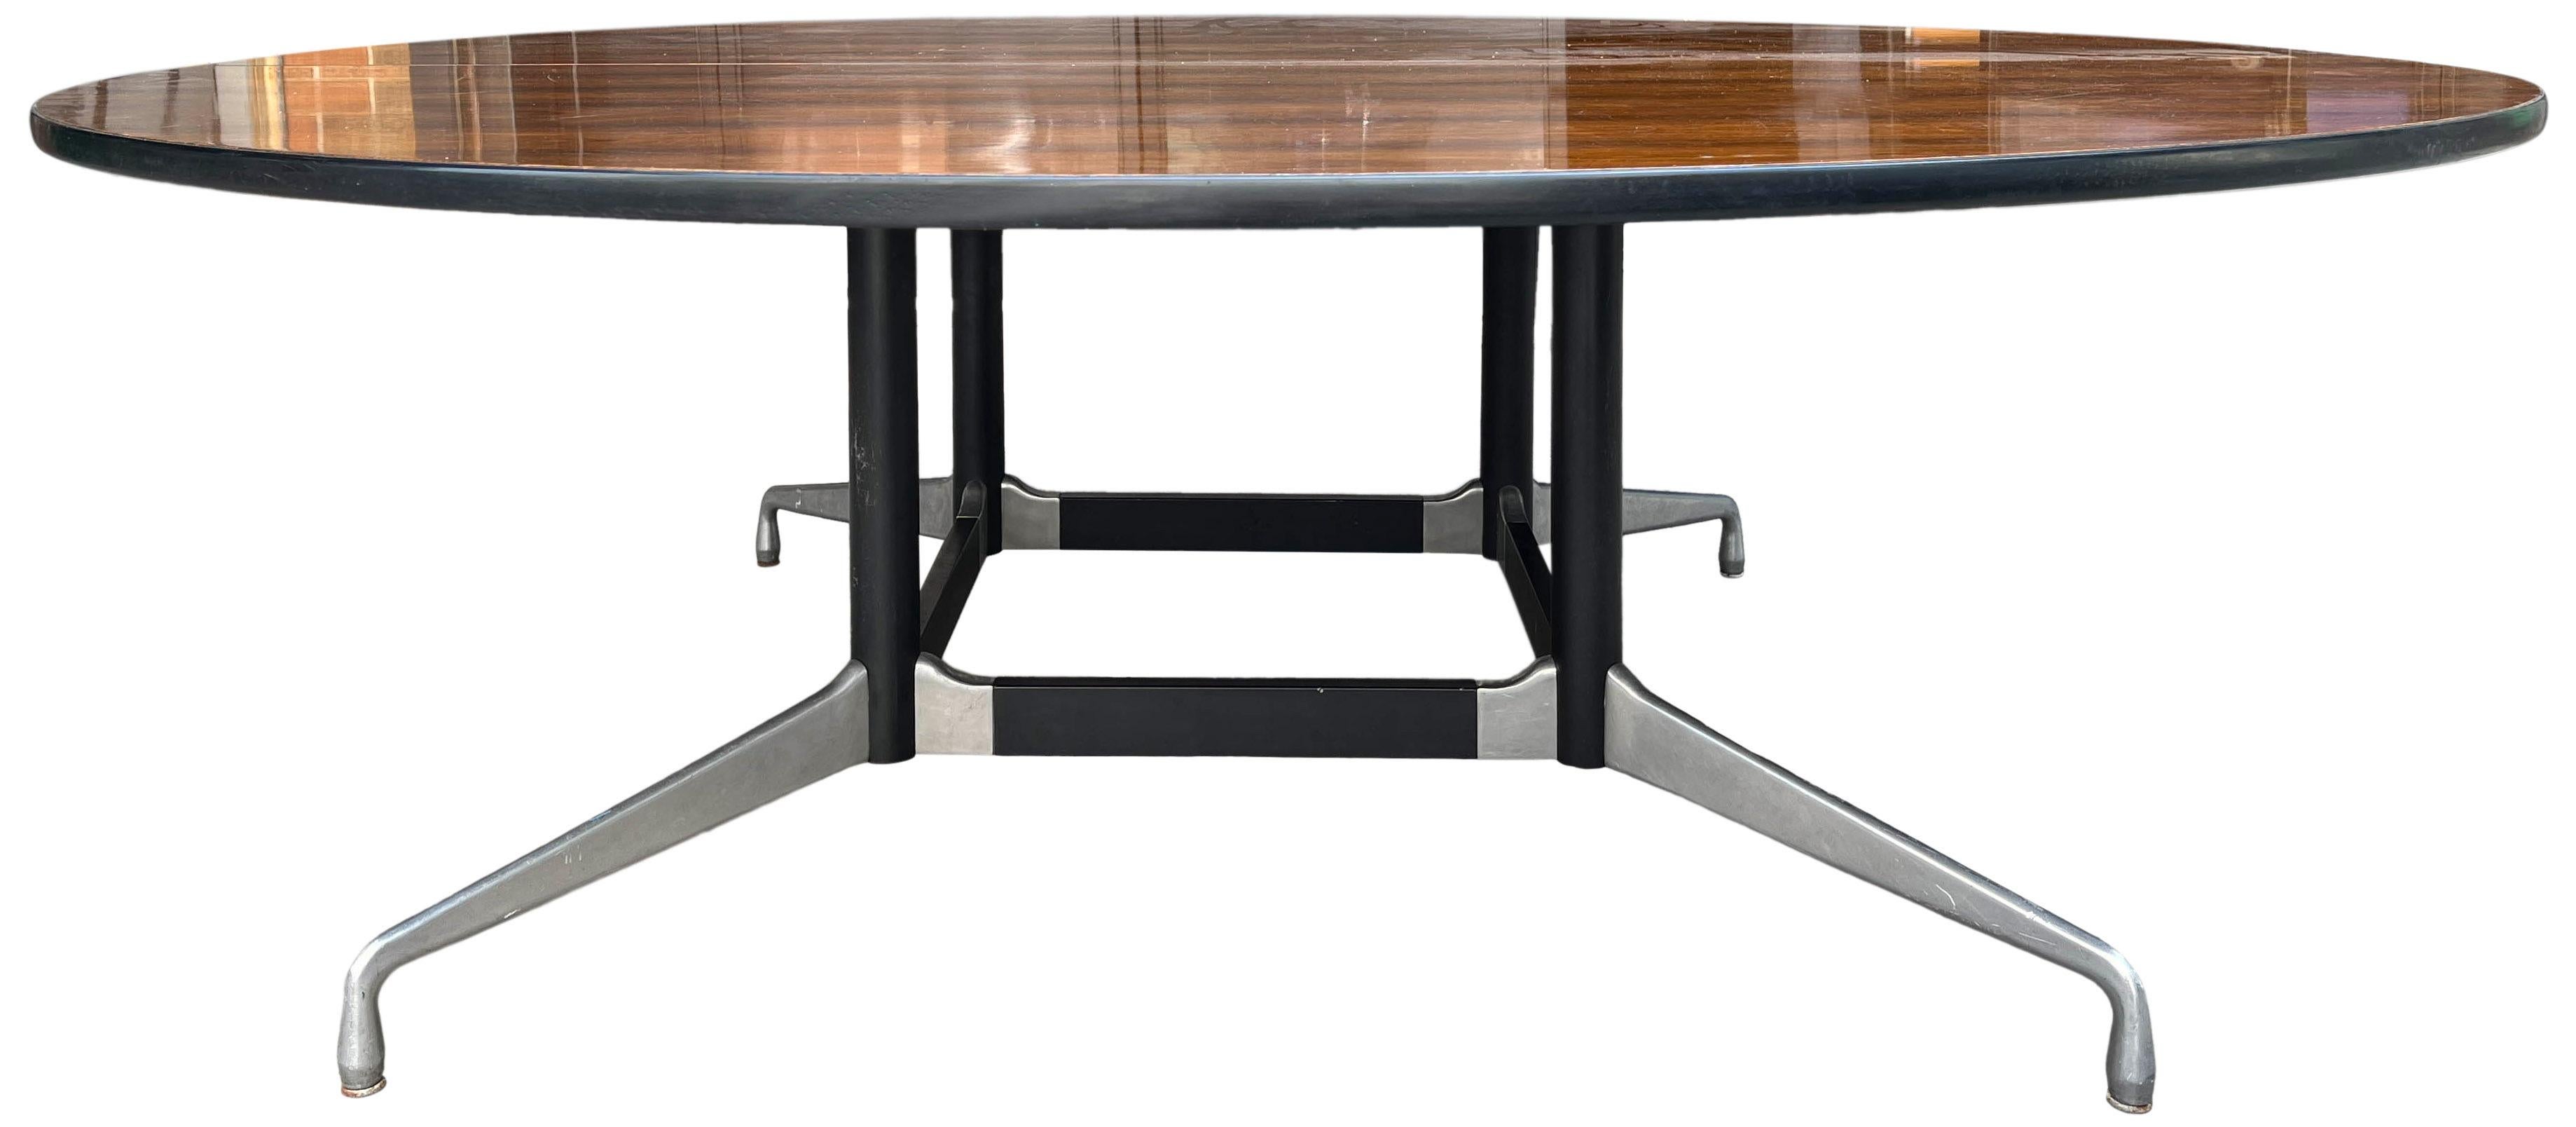 A glorious and monumental Mid-Century Modern conference table or dining table designed by Charles and Ray Eames for Herman Miller in rosewood. Segmented aluminium base with a 7’ round Rosewood top. Seats 10-12.
This table top easily separates in two